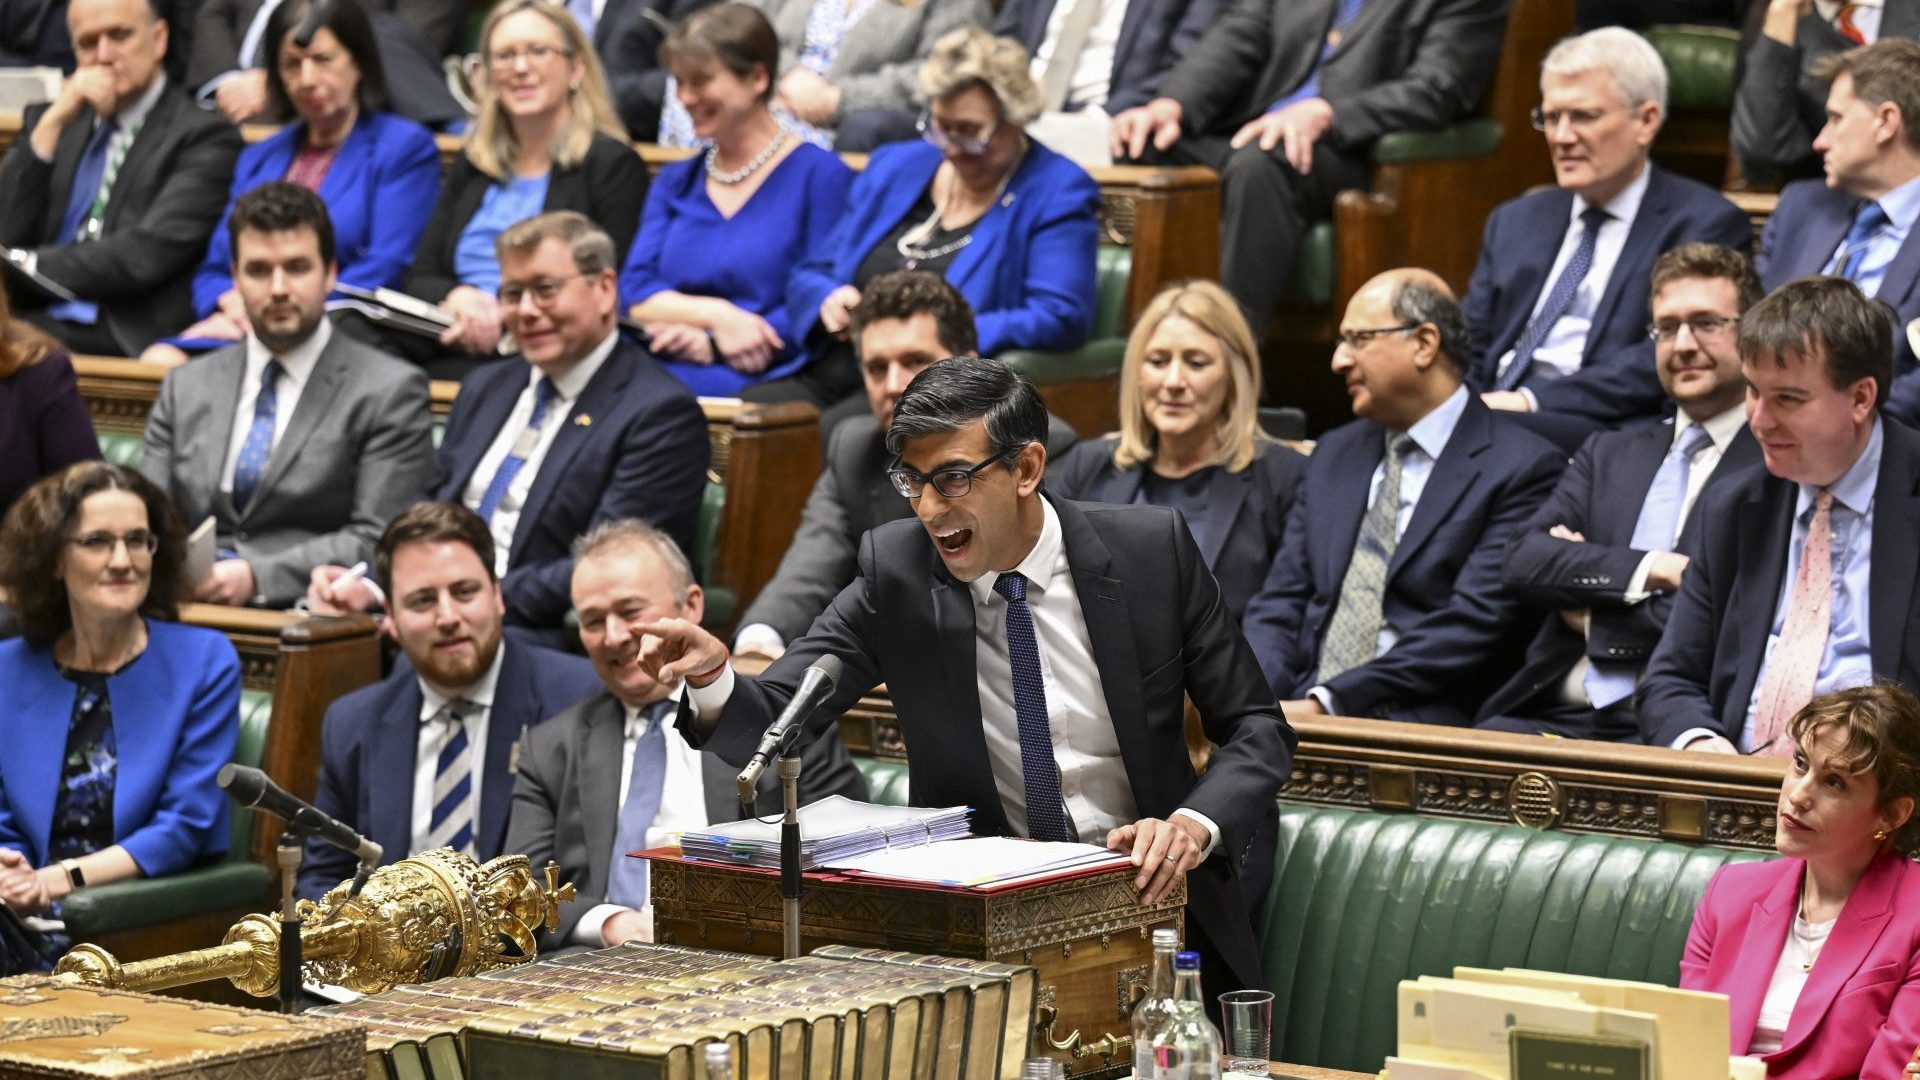 Even if Sunak is in no hurry to go, the rest of us have had enough and deserve better. Photo: UK Parliament/Maria Unger